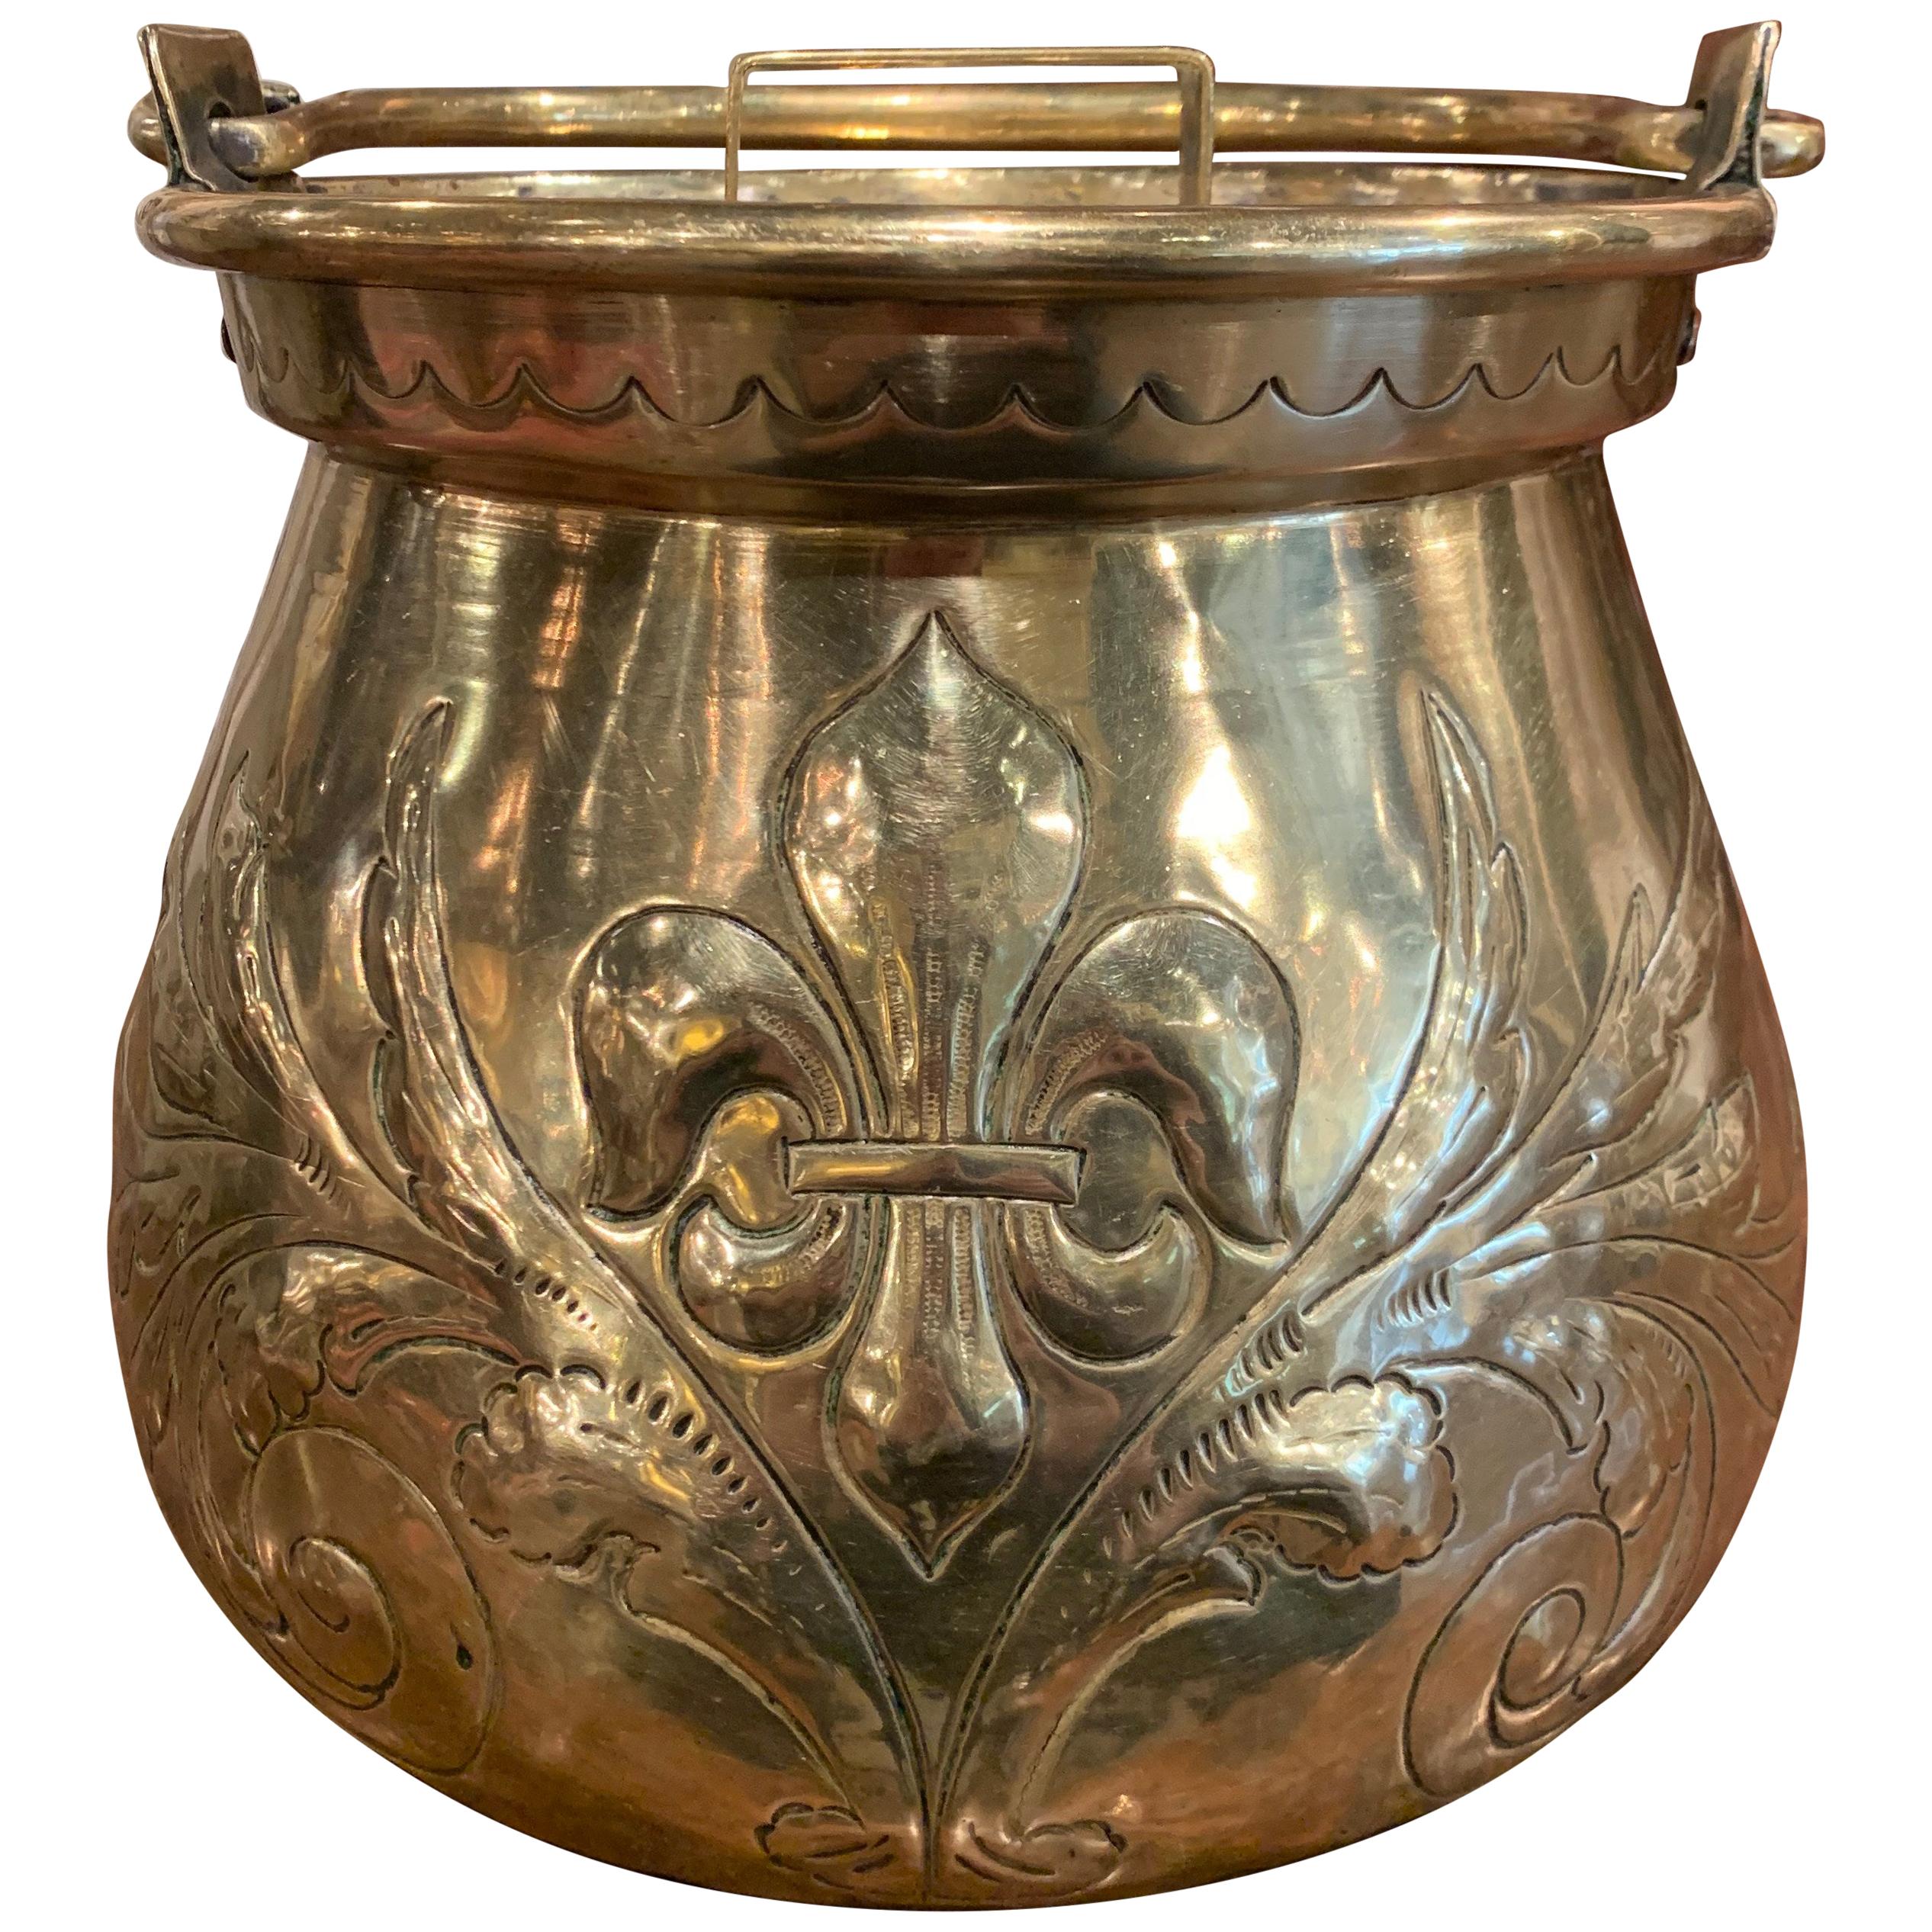 Late 17th Century French Louis XIV Brass Cauldron with Fleur de Lys and Crest